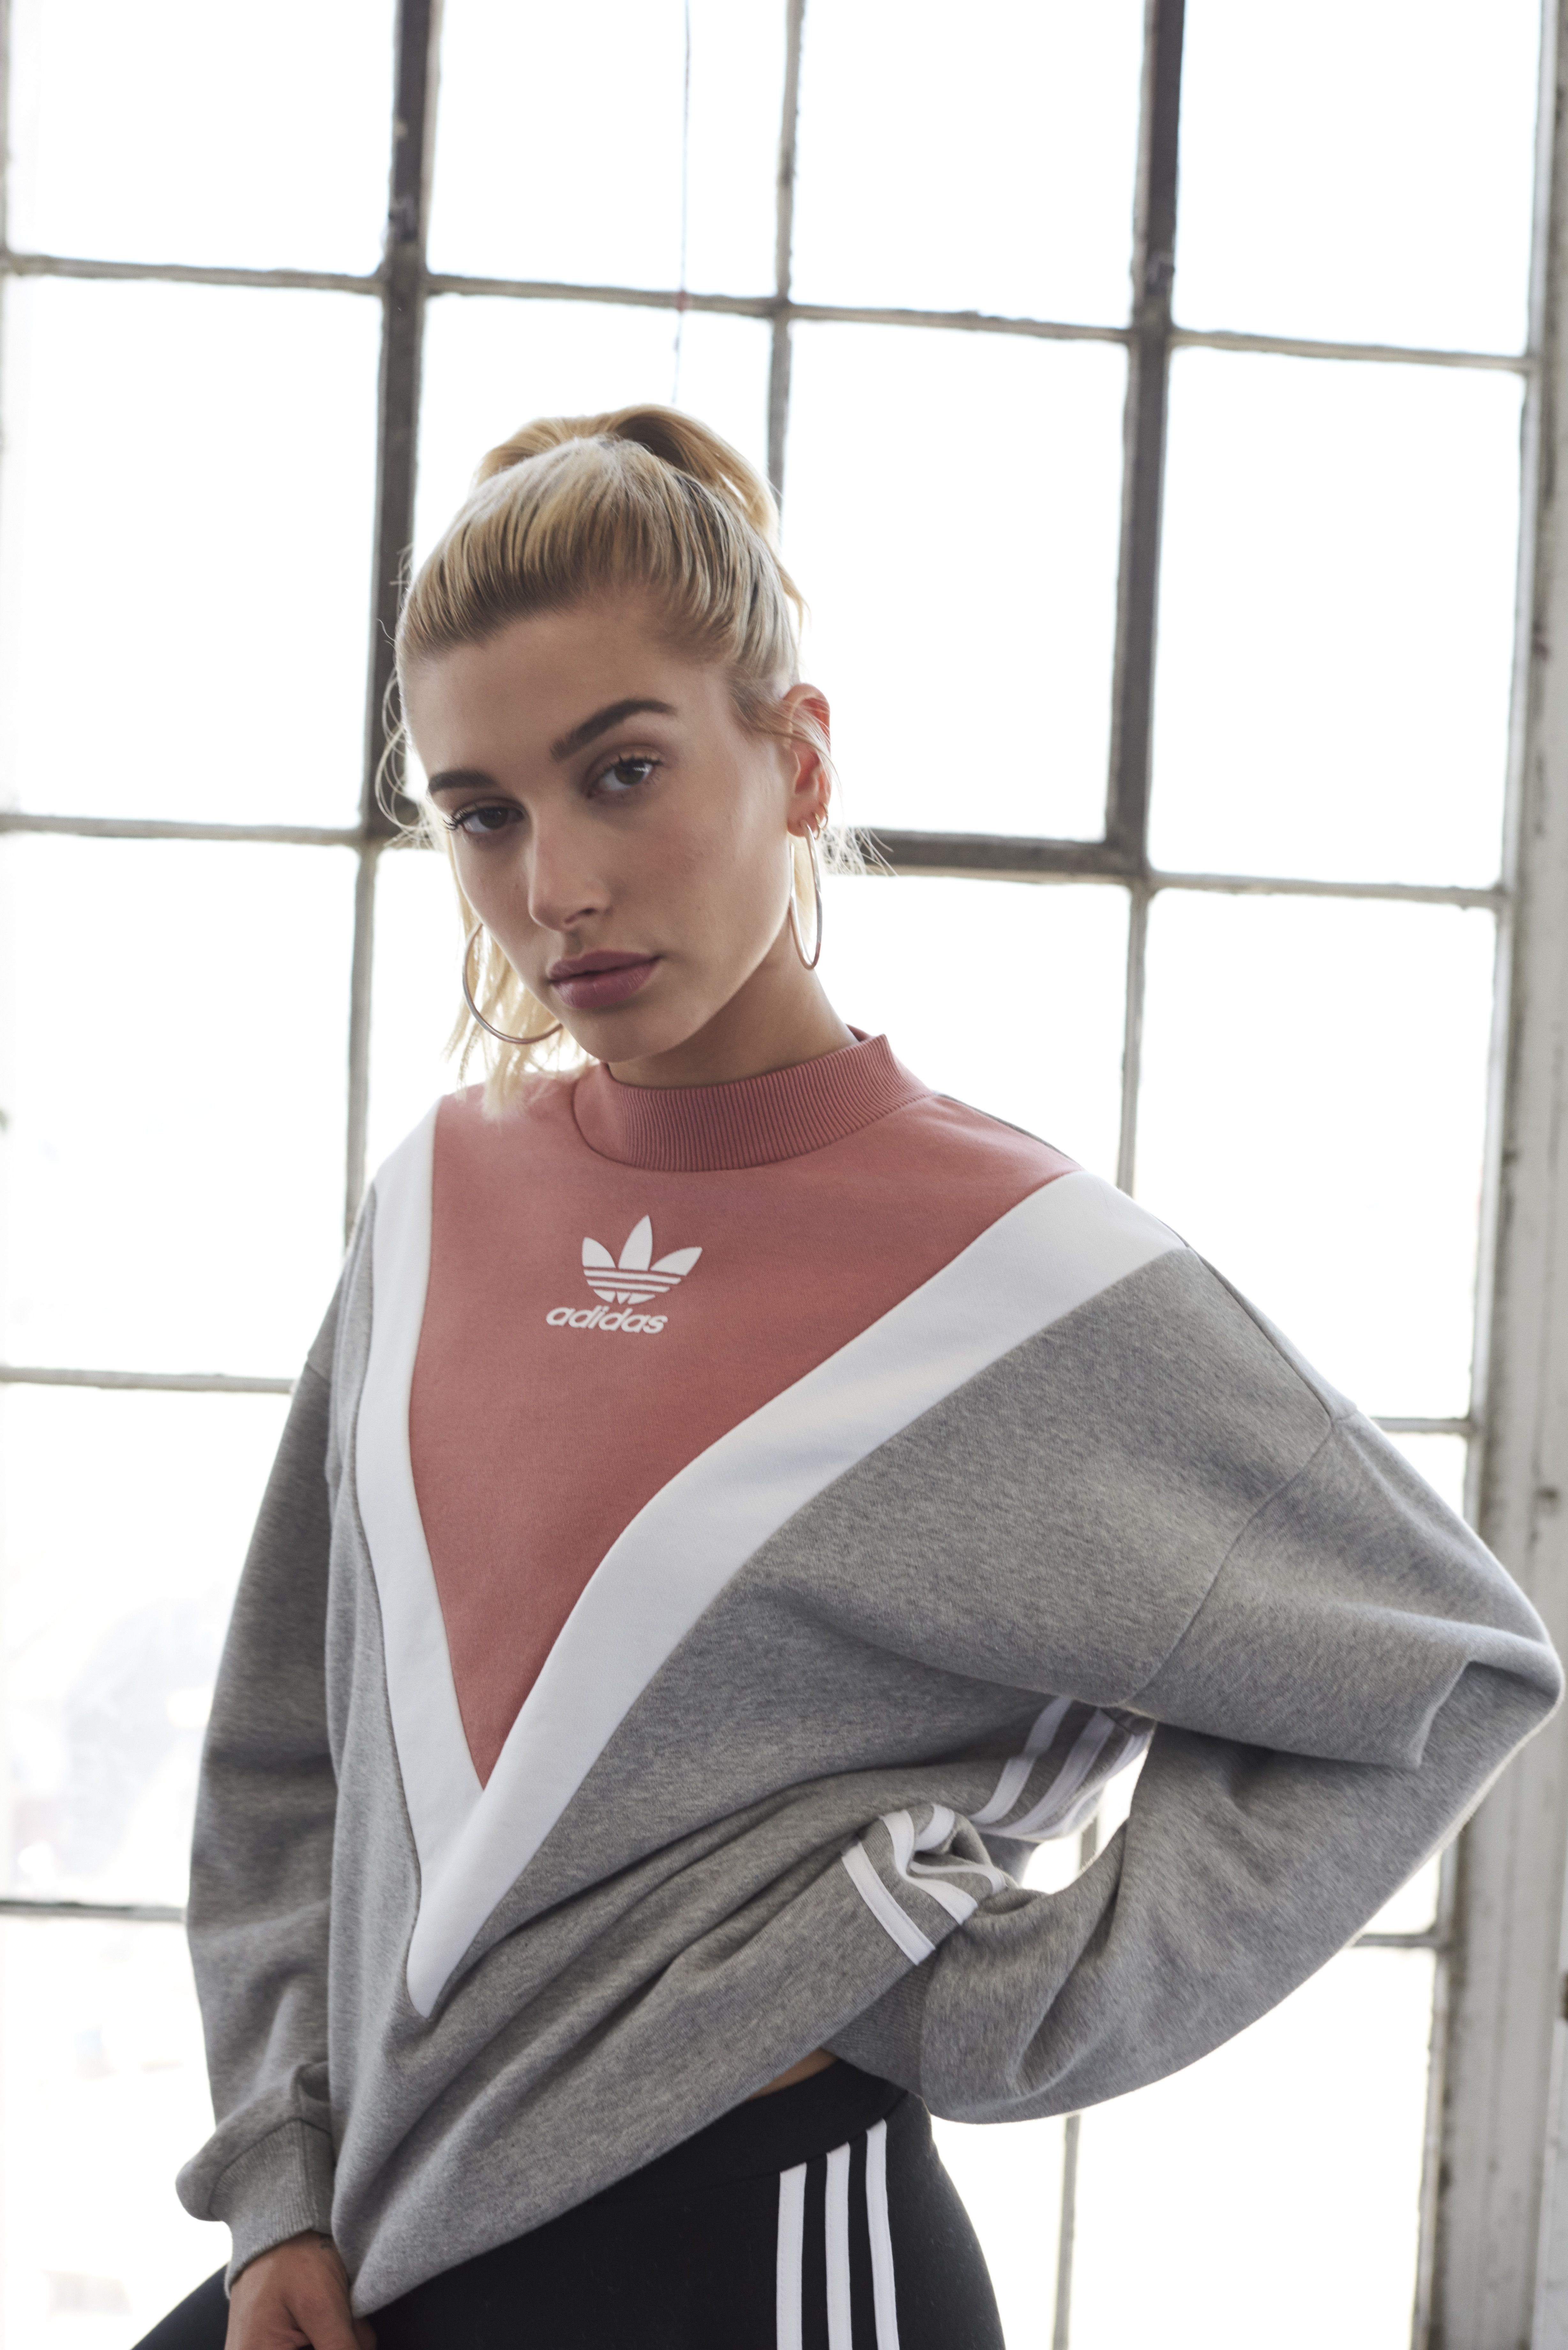 Fly In The New Adidas x JD Sports Campaign